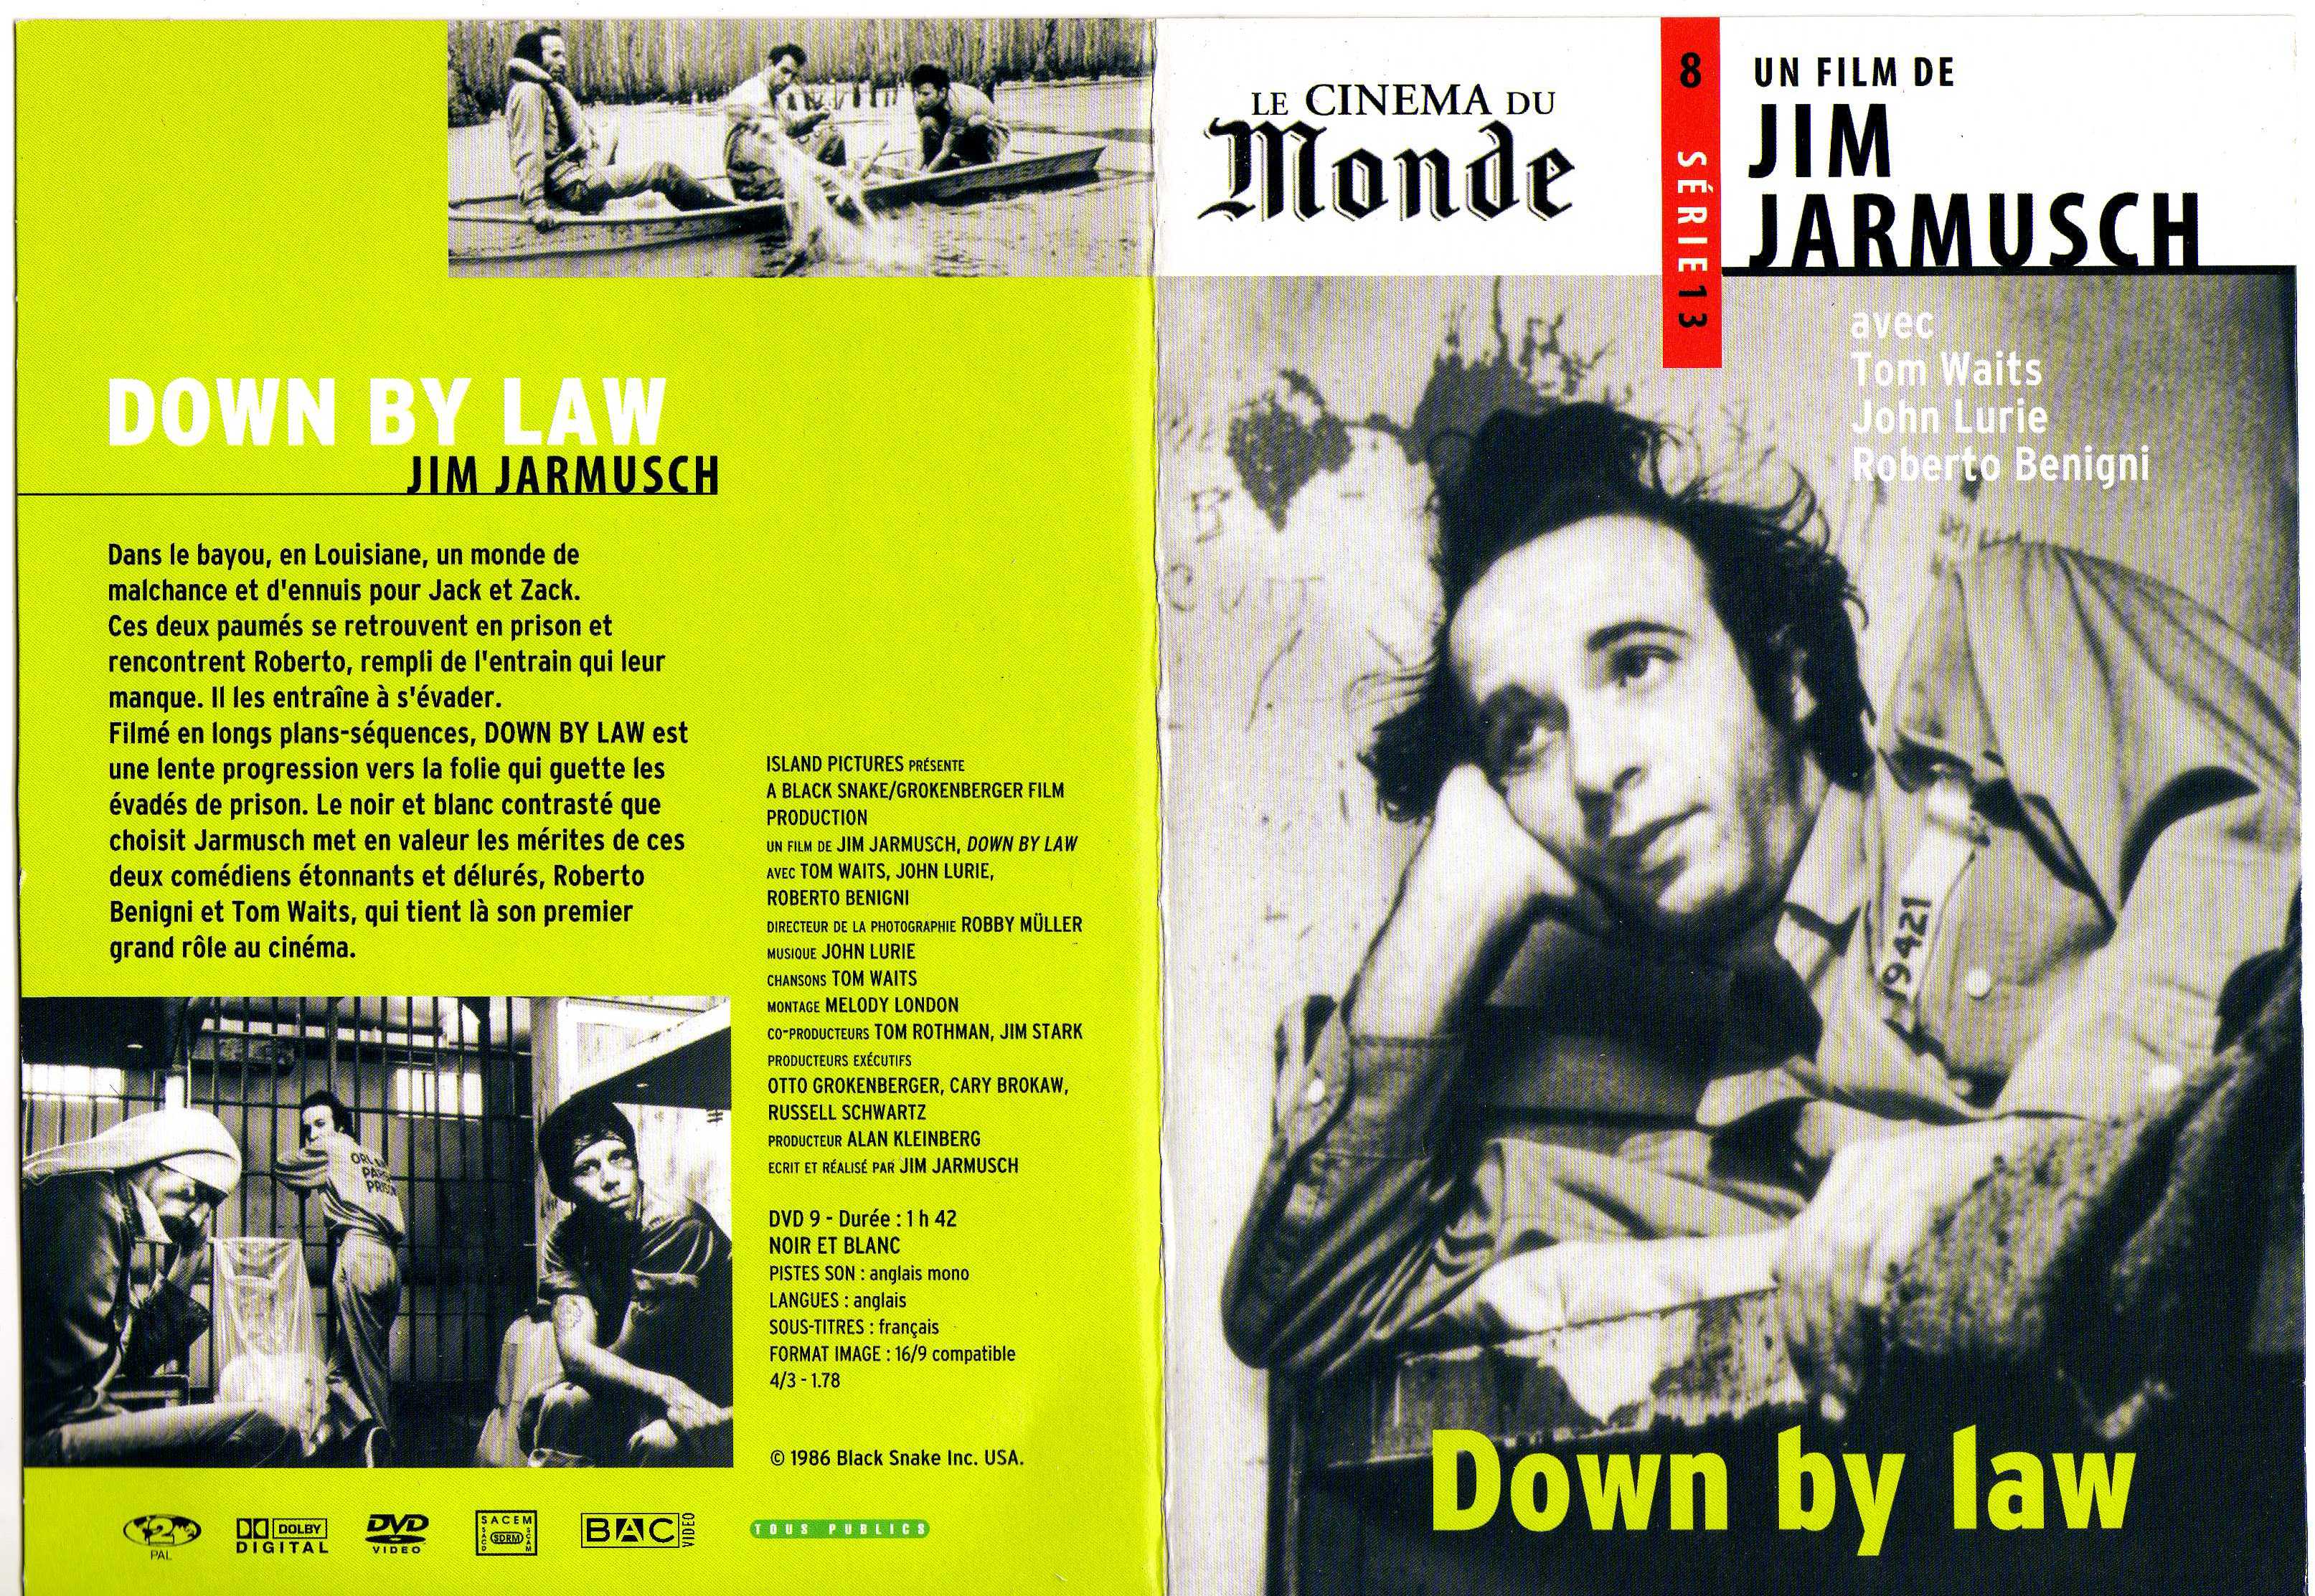 Jaquette DVD Down by law